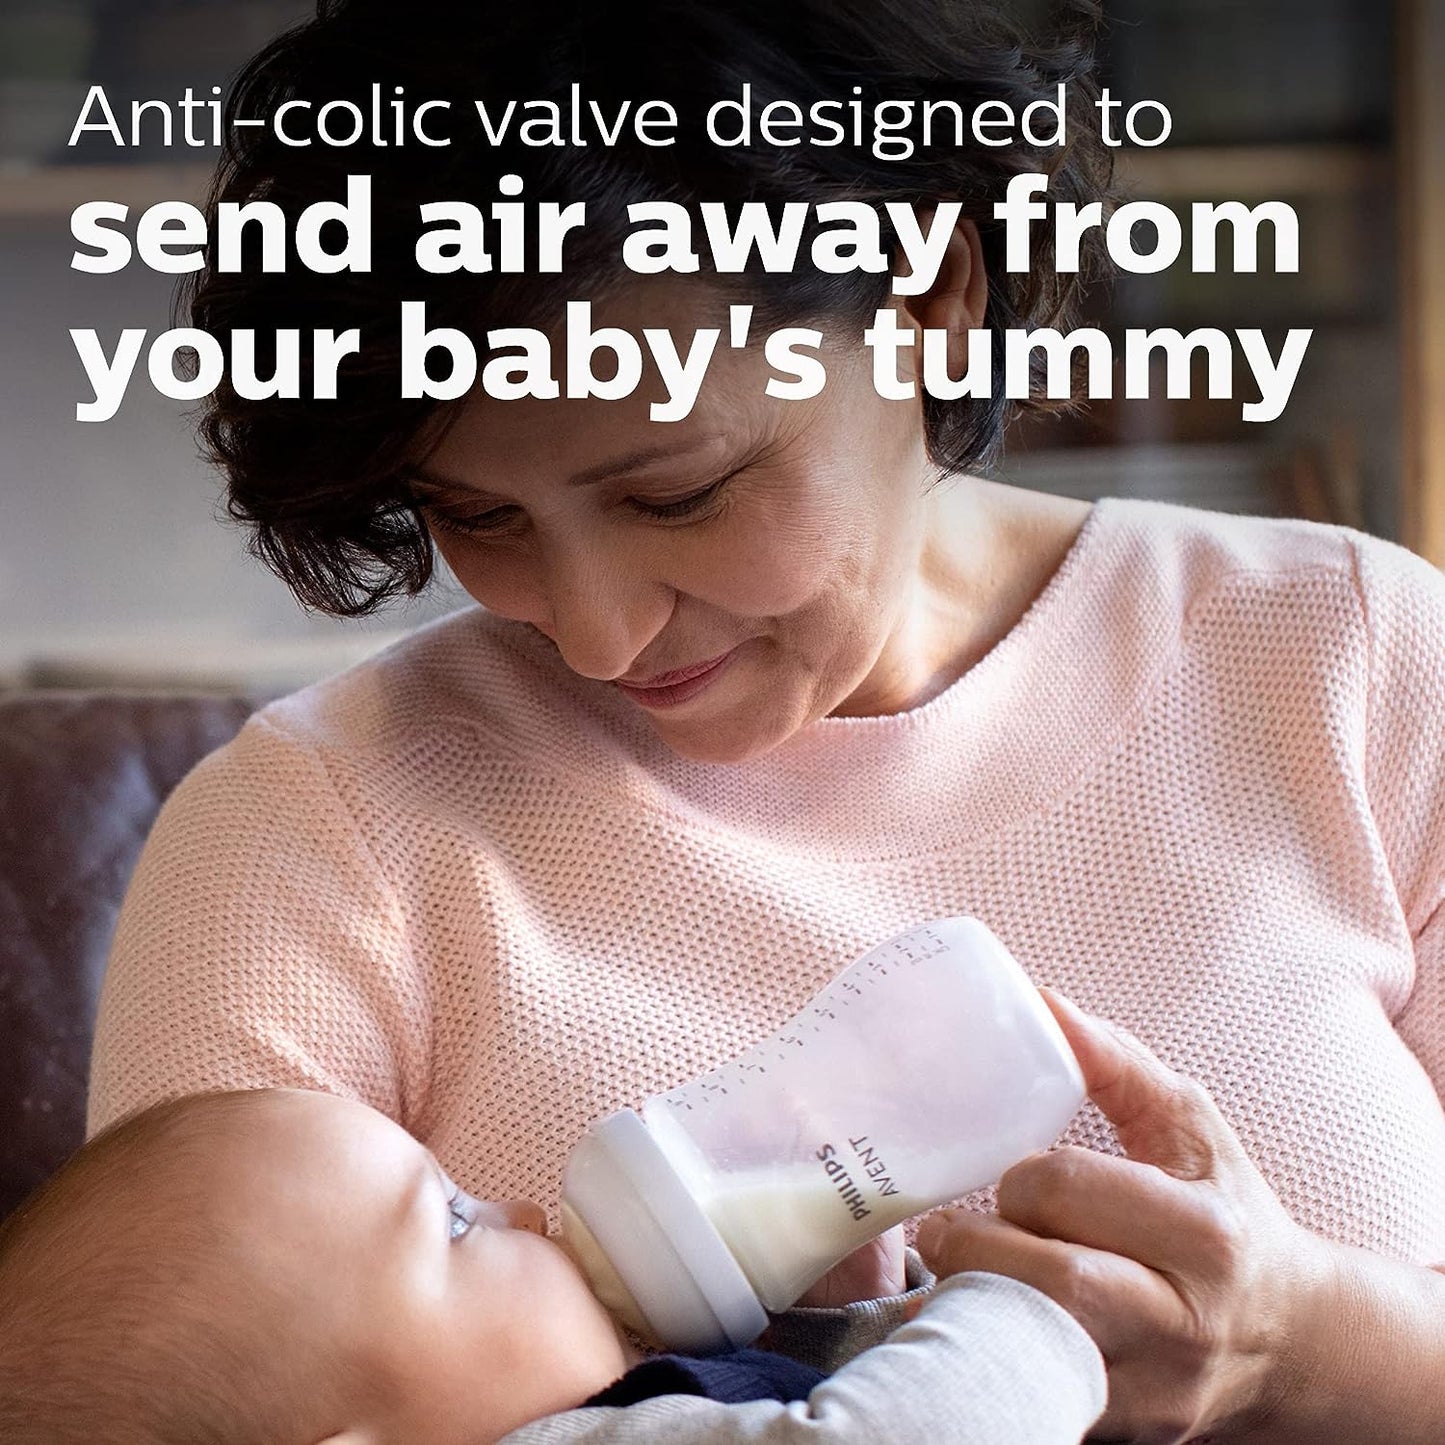 Avent Natural Baby Bottle With Natural Response Nipple - Essentials Baby Gift Set